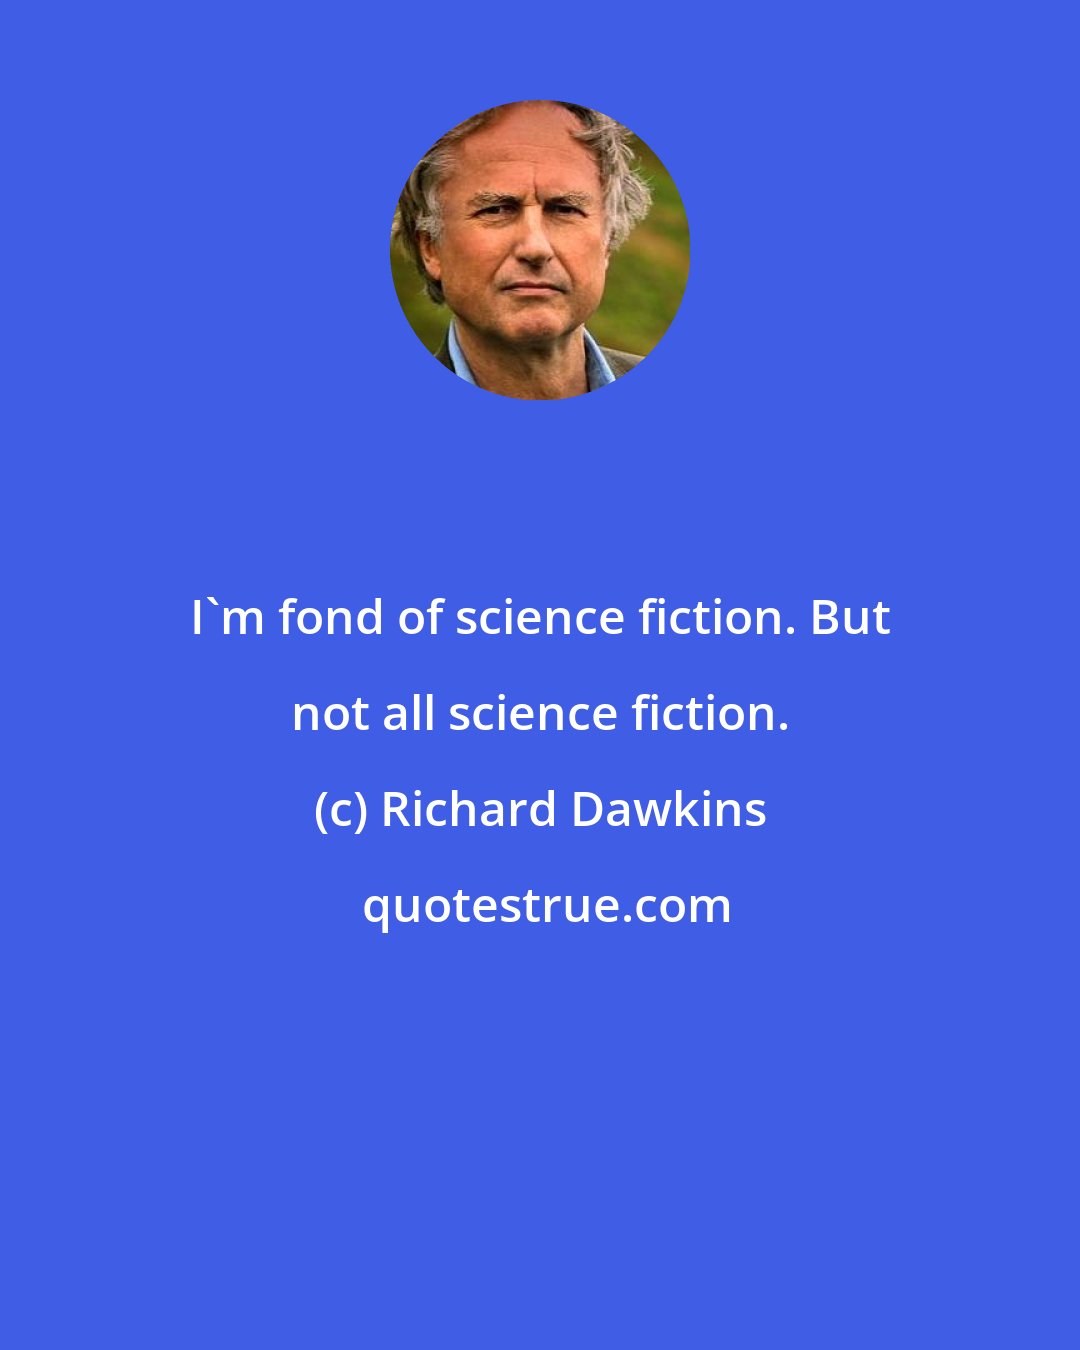 Richard Dawkins: I'm fond of science fiction. But not all science fiction.